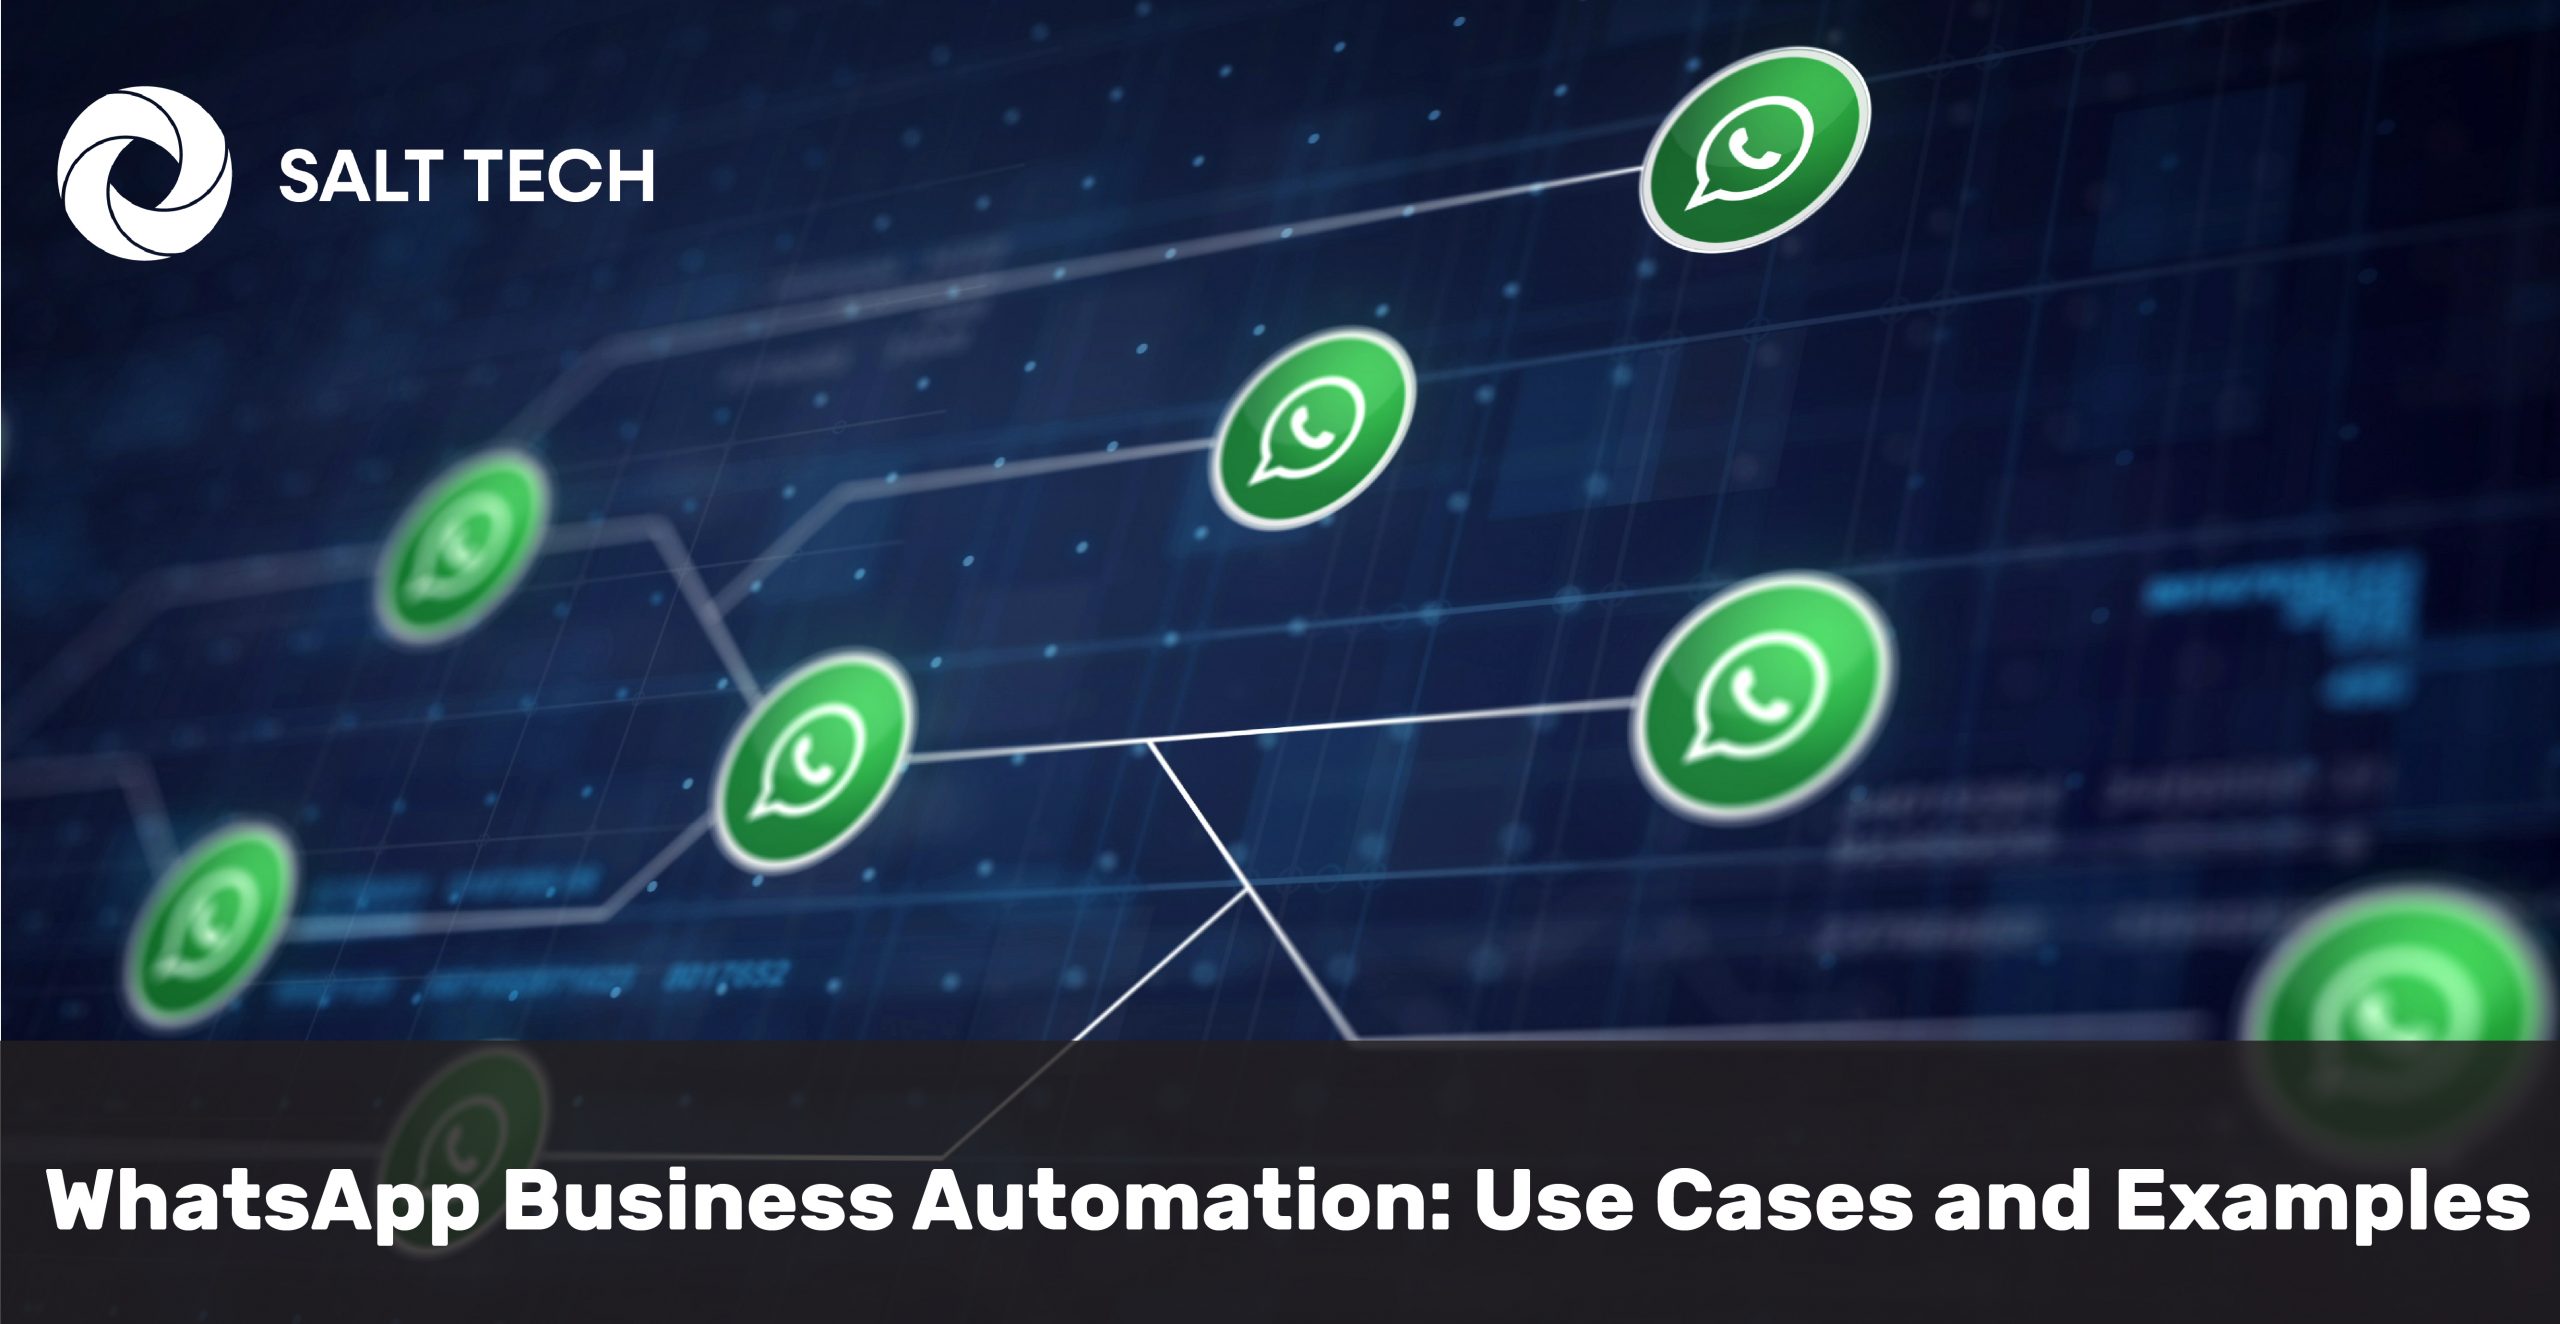 SALT TECH- WhatsApp Business Automation: Use Cases and Examples